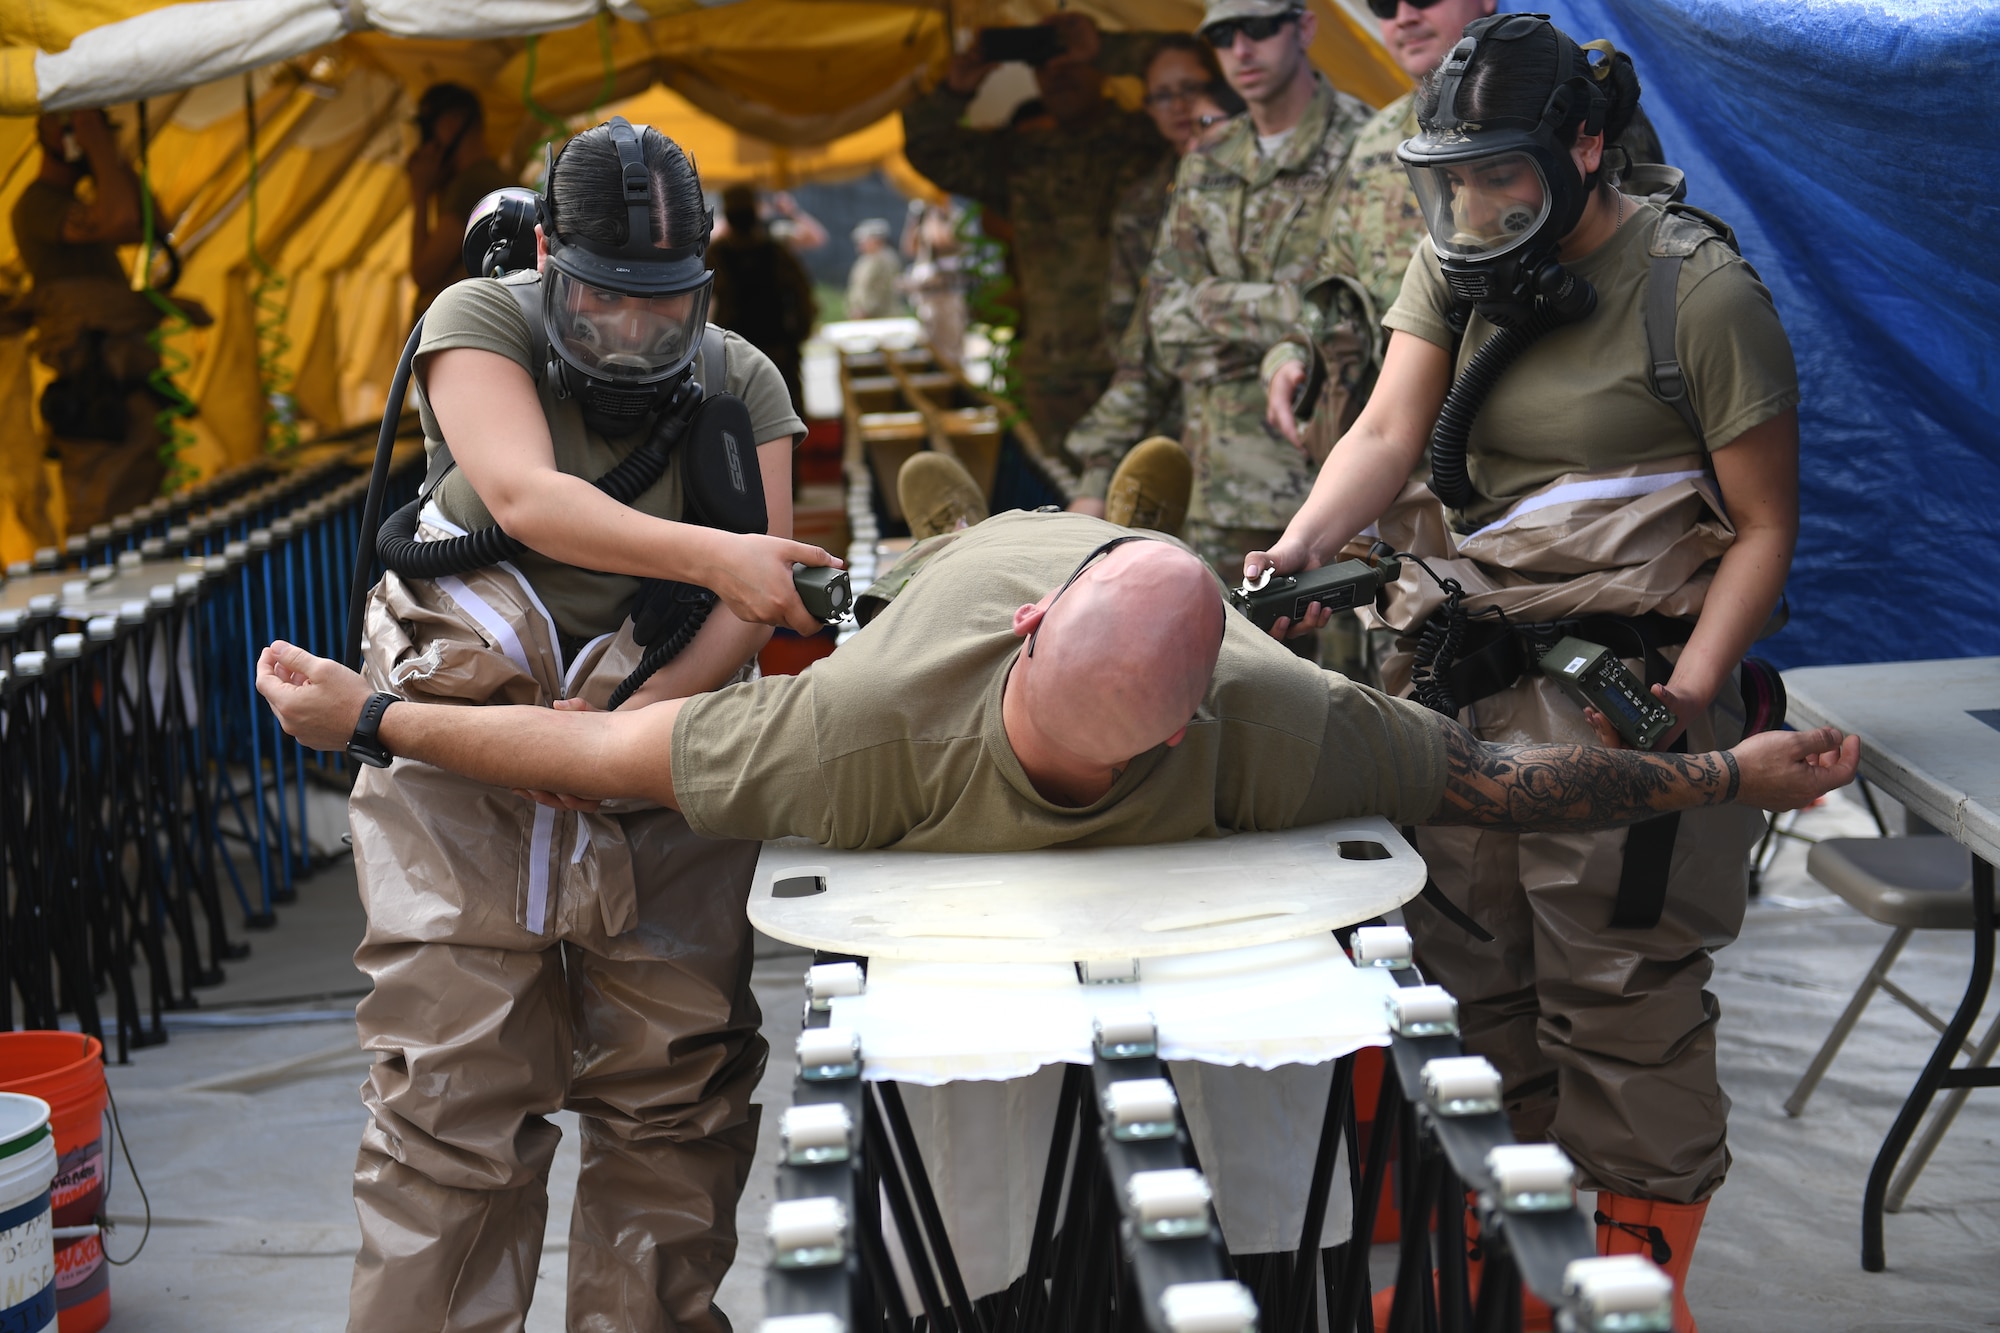 The Texas National Guard's 6th CERFP Task Force, which includes the 149th Medical Det-1 and Fatality Search and Recovery Team, participated in response training with local civil authorities Feb. 5, 2019, in Round Rock, Texas.